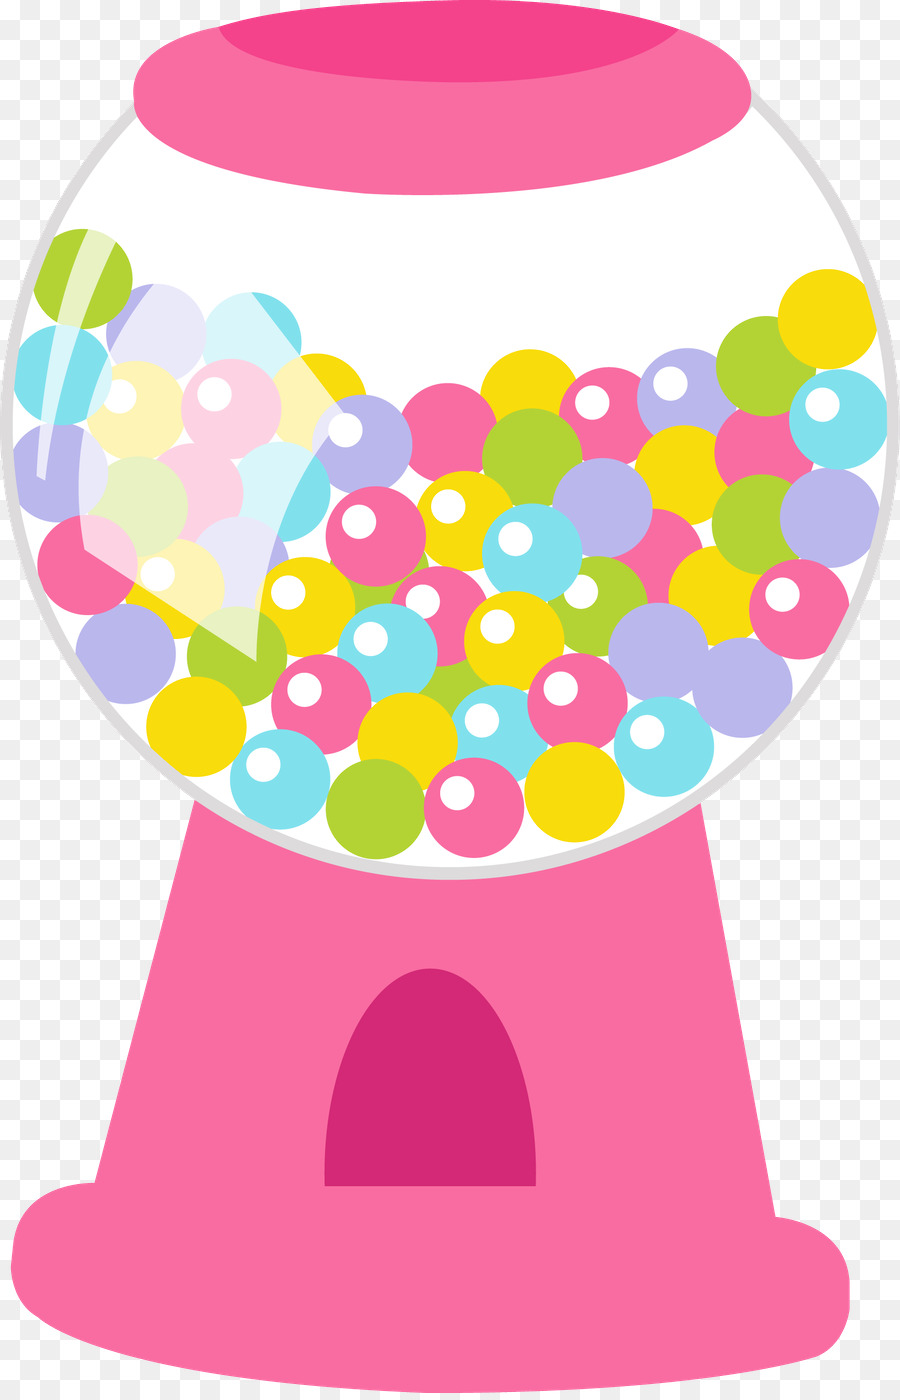 Candy land png.